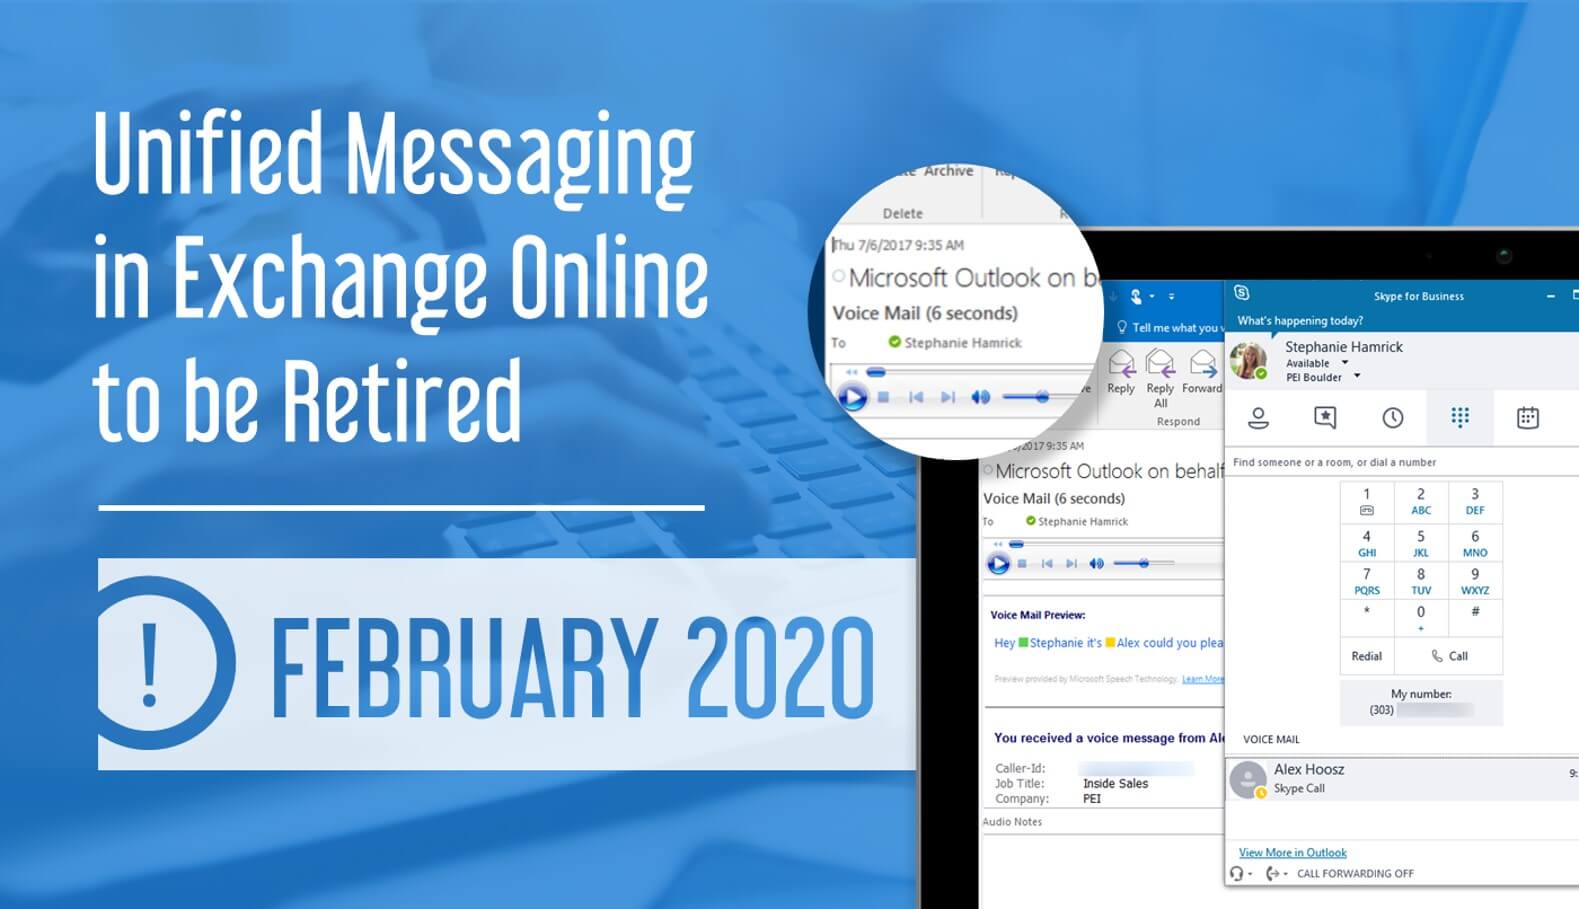 Exchange online Unified Messaging Retired February 2020 announcement